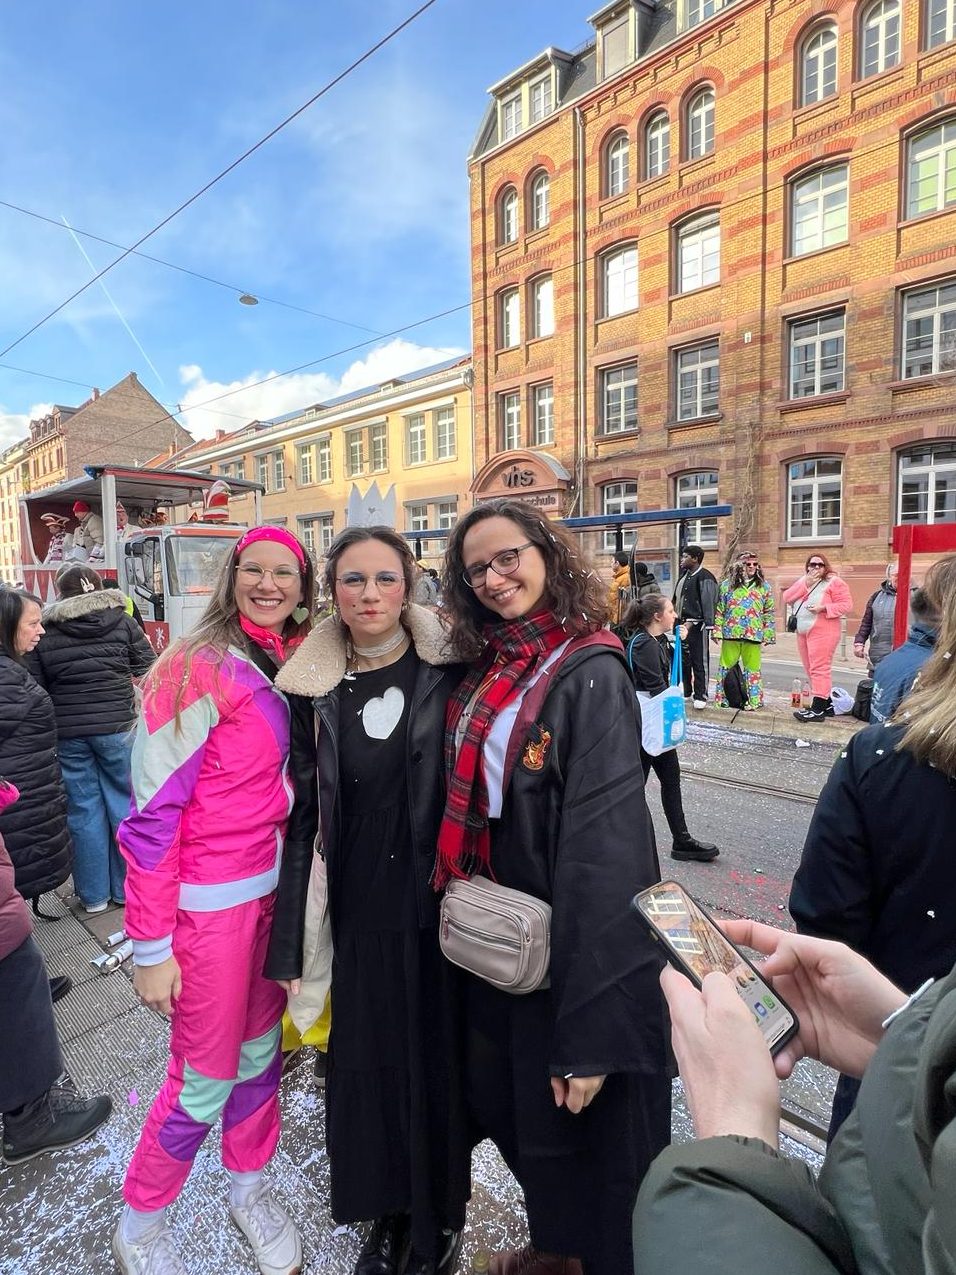 A girl dressed in a neon pink track suit, a girl dressed in a black dress and wearing a crown and queen like make up and a girl dresses as a wizard all posing for the photo. I the background there is a parade, a crowd of viewers and apartment buildings.